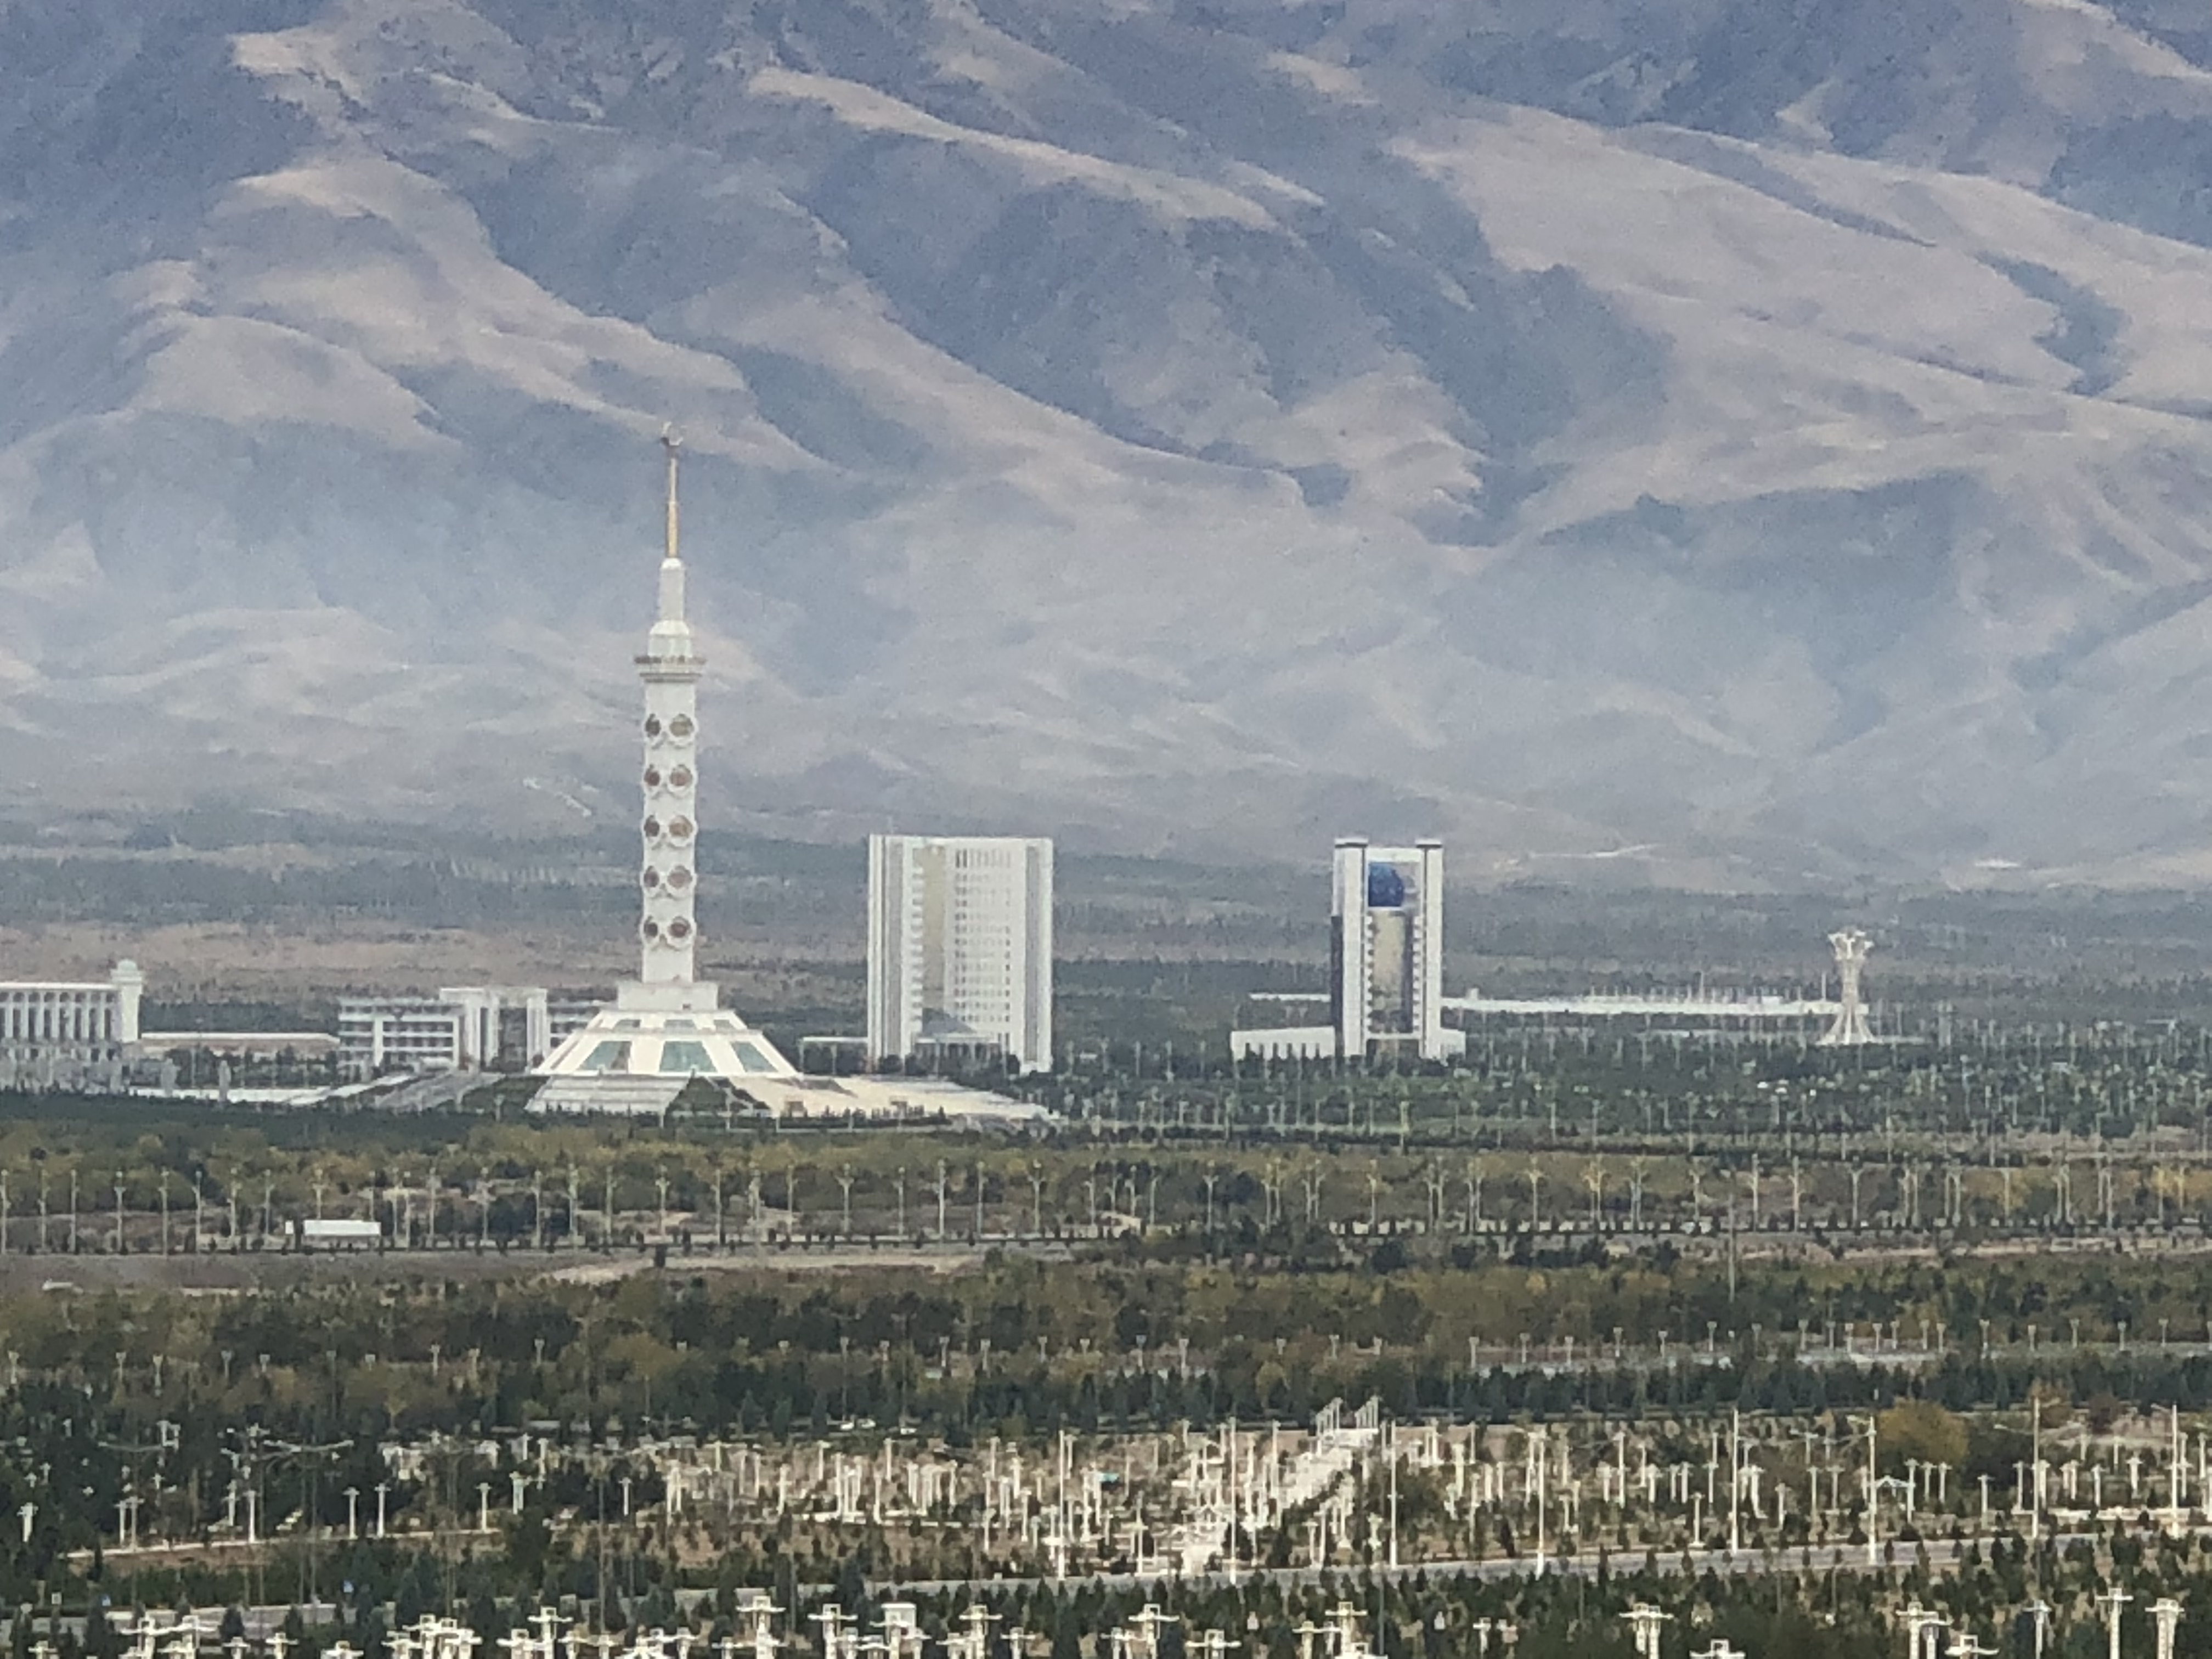 a tall white tower in a city with trees and mountains in the background